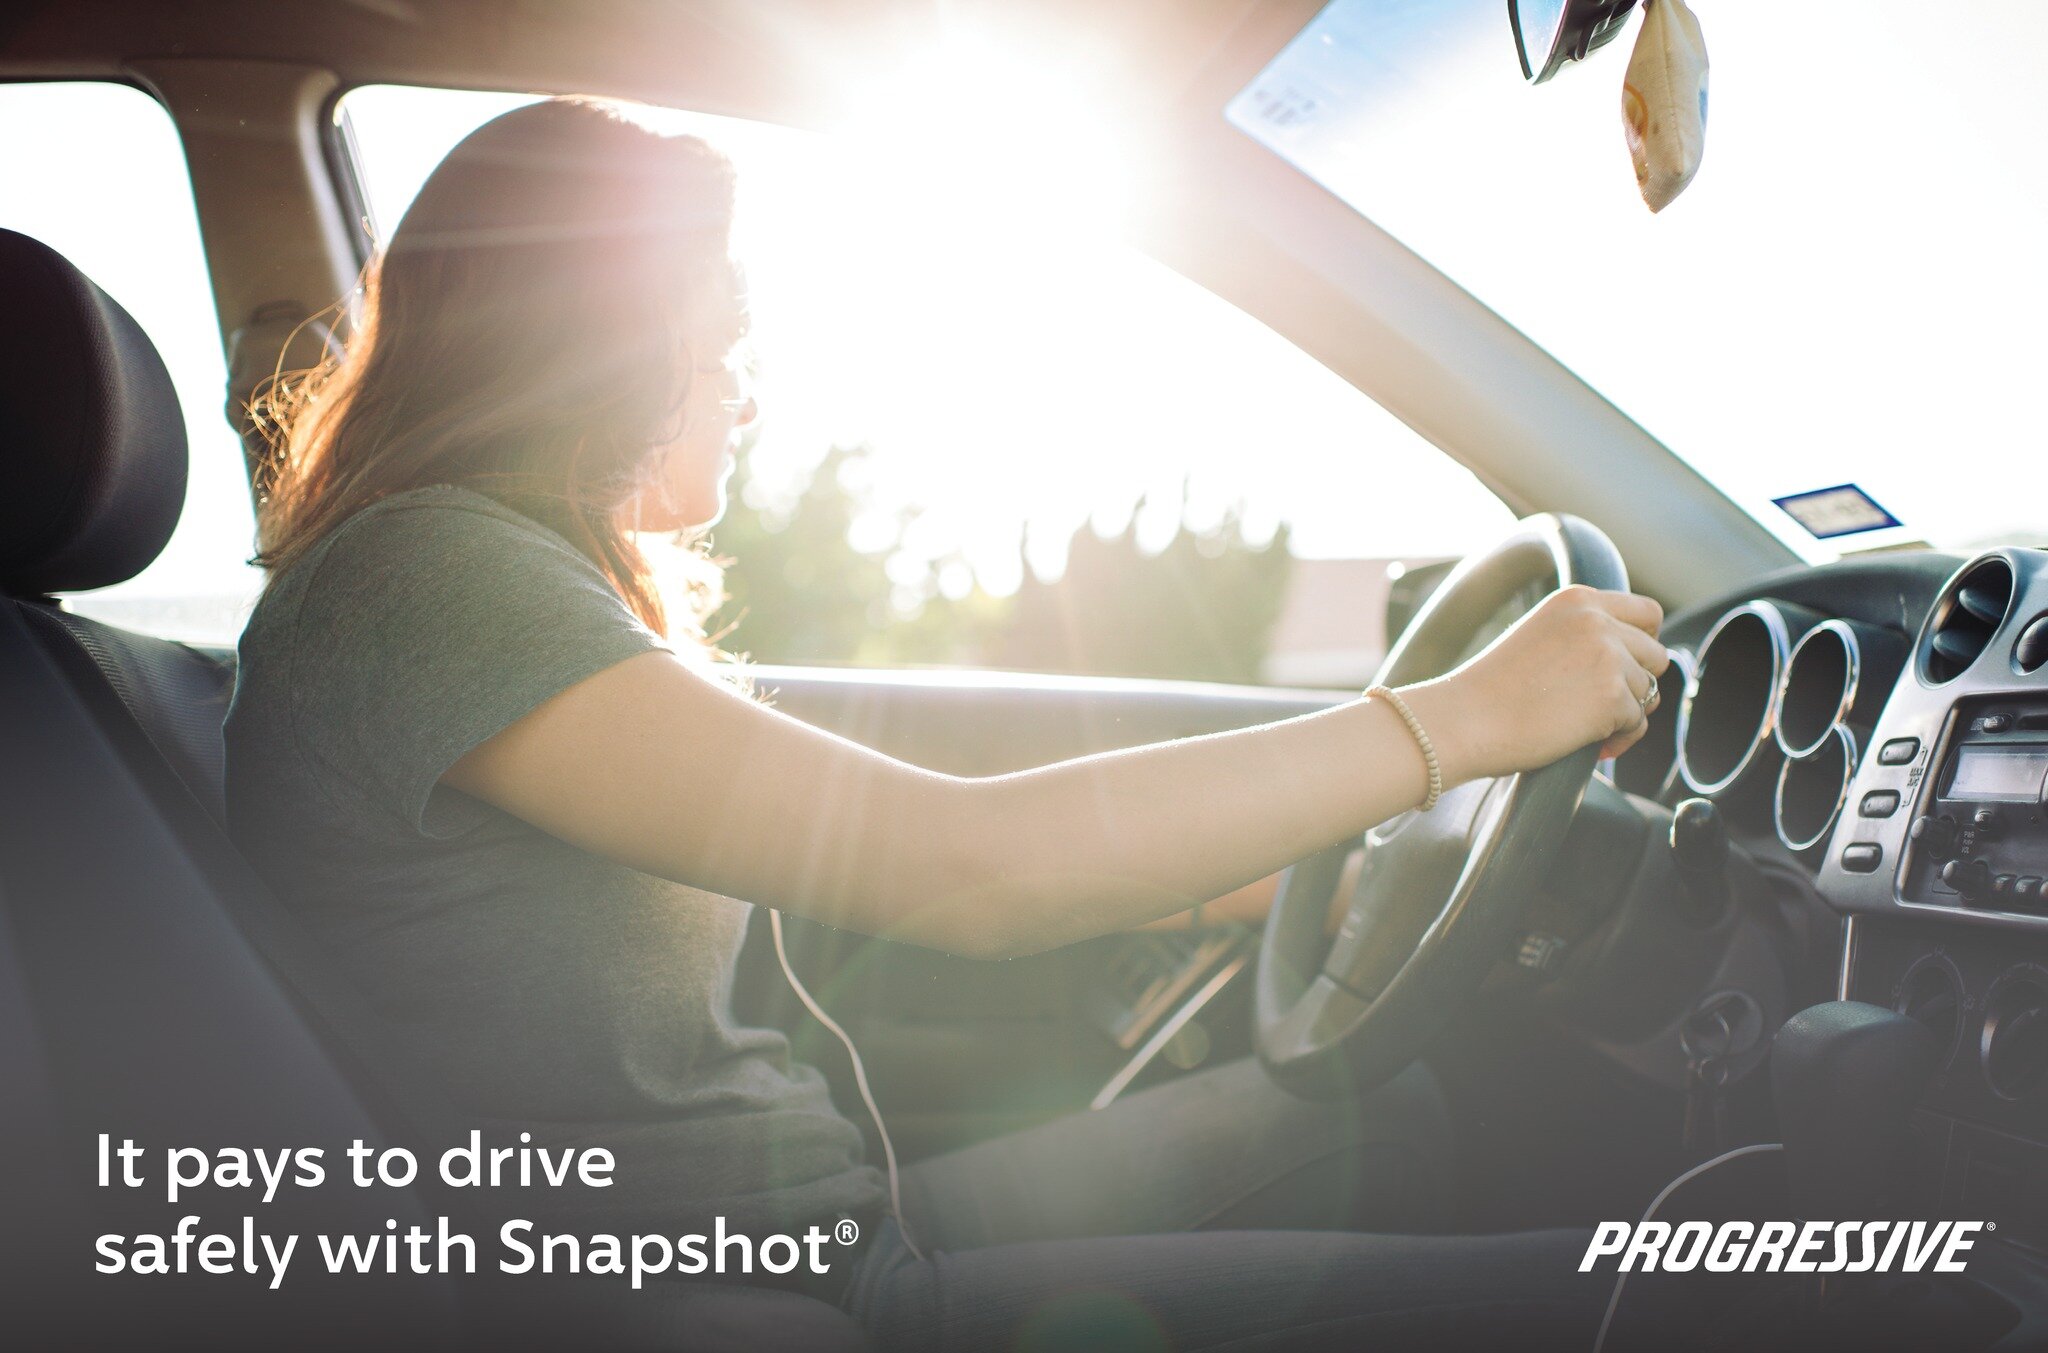 Check back to yesterday's post to learn about Progressive's Snapshot Rewards!

It really does pay off! 🚗💰 Drive smart and save big with Snapshot Rewards from Progressive. Learn how you can put money back in your pocket just for driving safely. 

#P